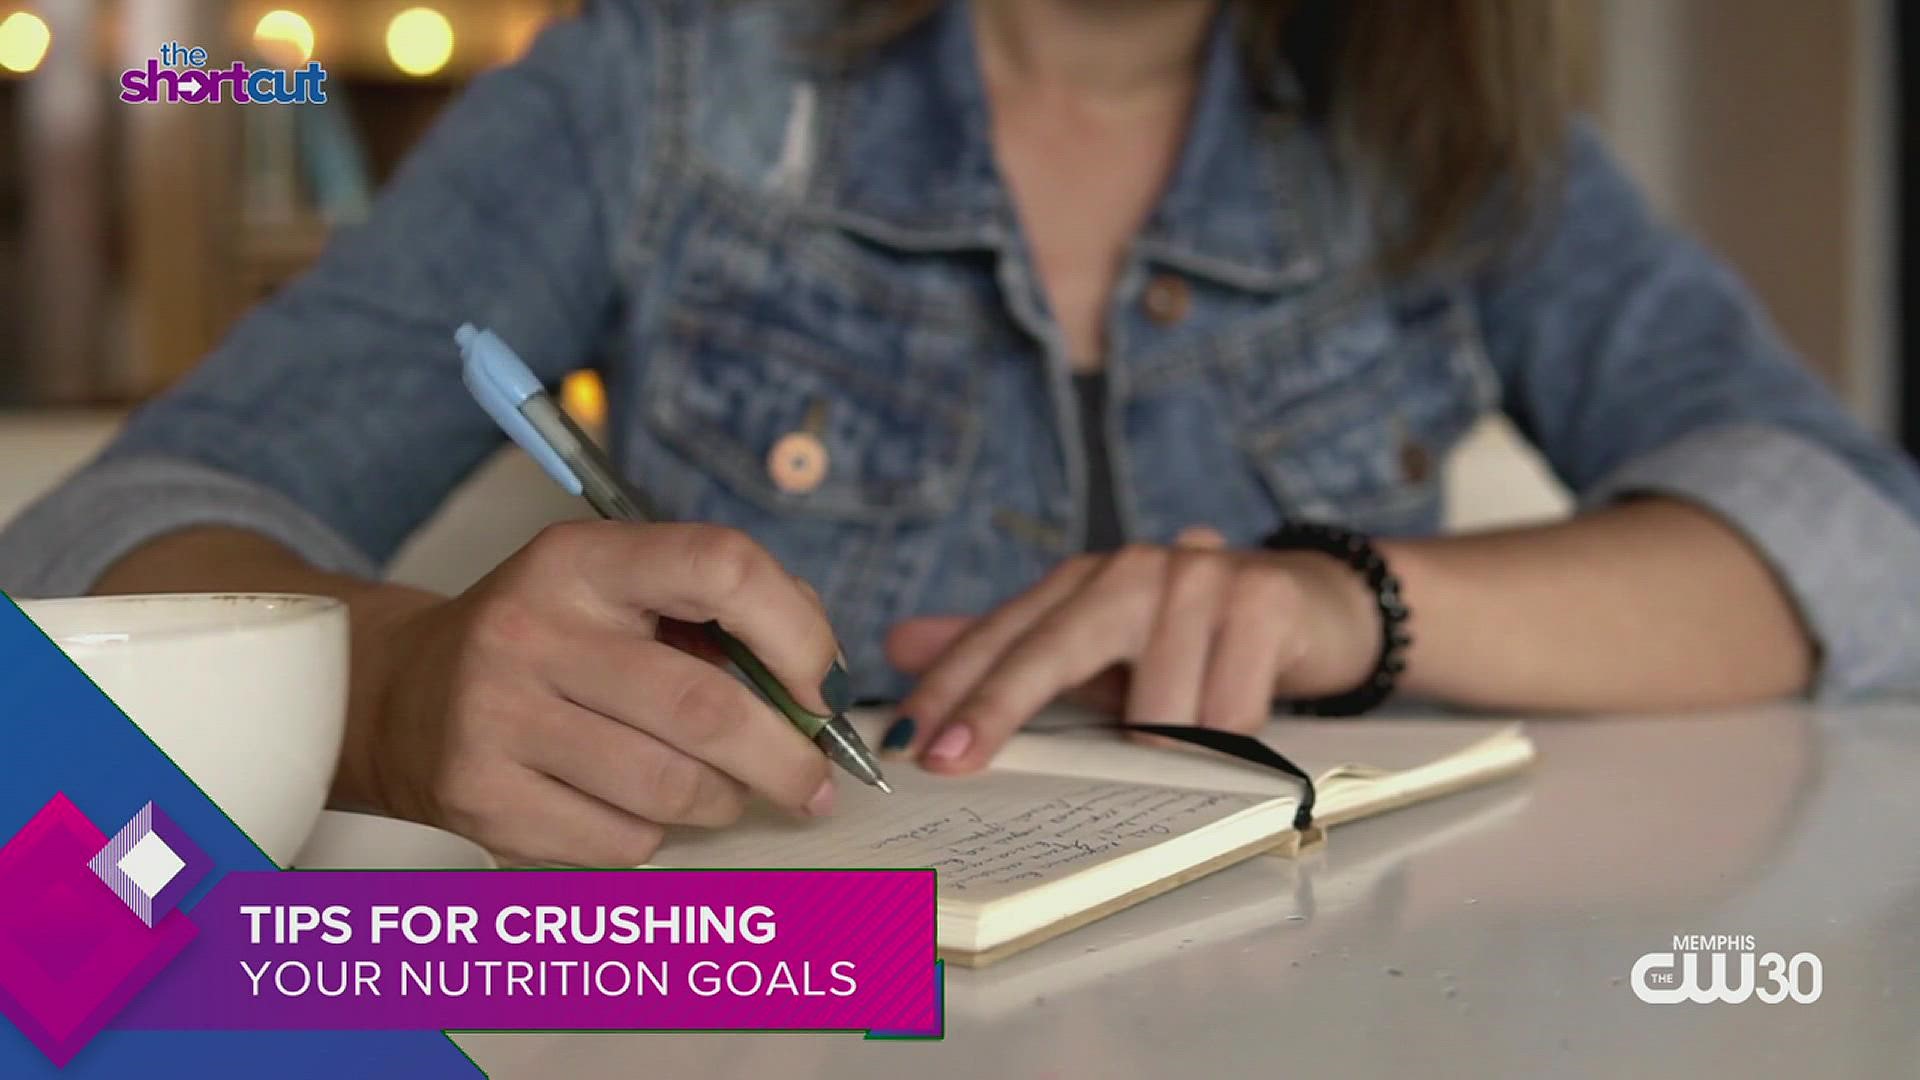 Struggling to stay healthy? Then stop making excuses and start crushing your nutrition goals with nutritionist Ryan Zuber this year! Your body will thank you!